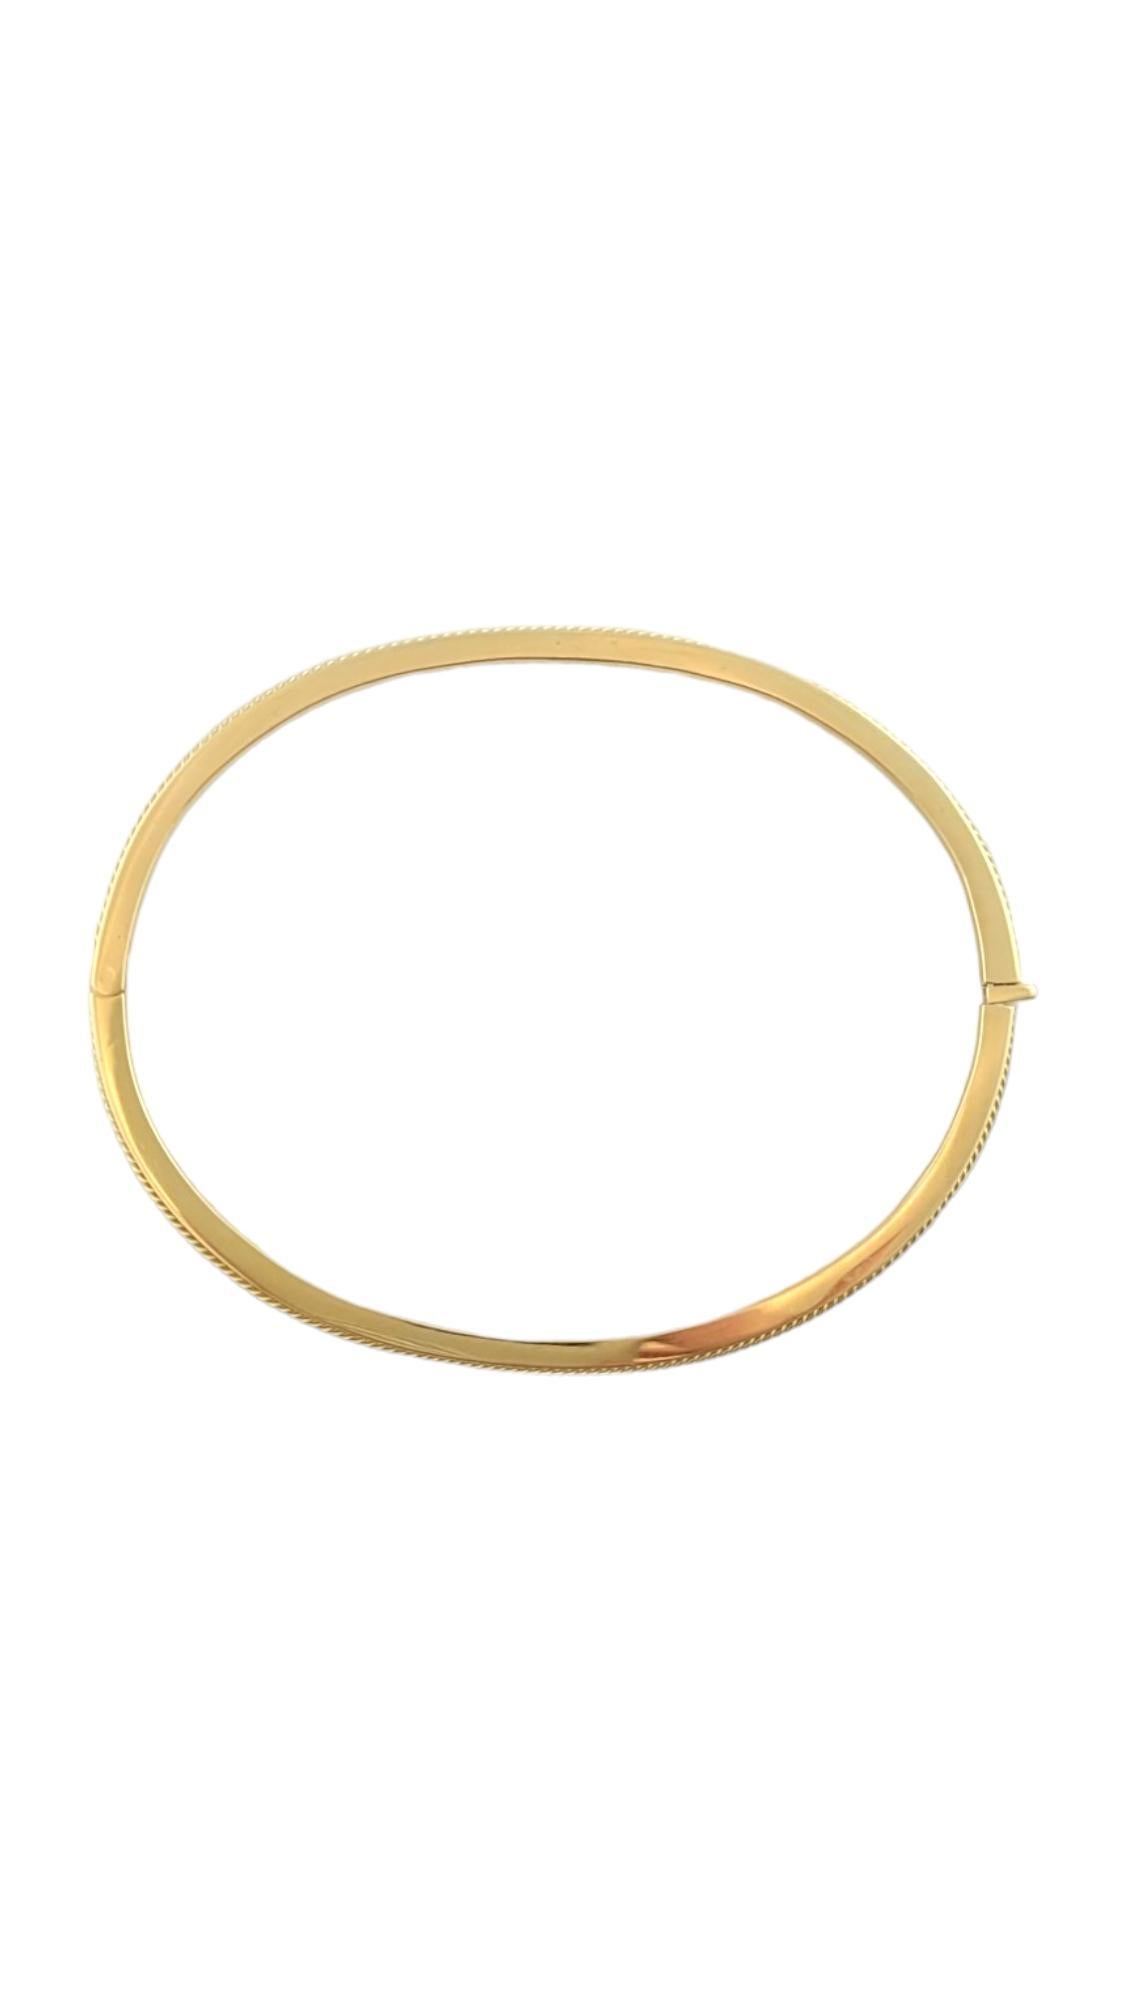 Hidalgo 18K Yellow Gold Oval Rope Accented Bangle Bracelet #16506 For Sale 1